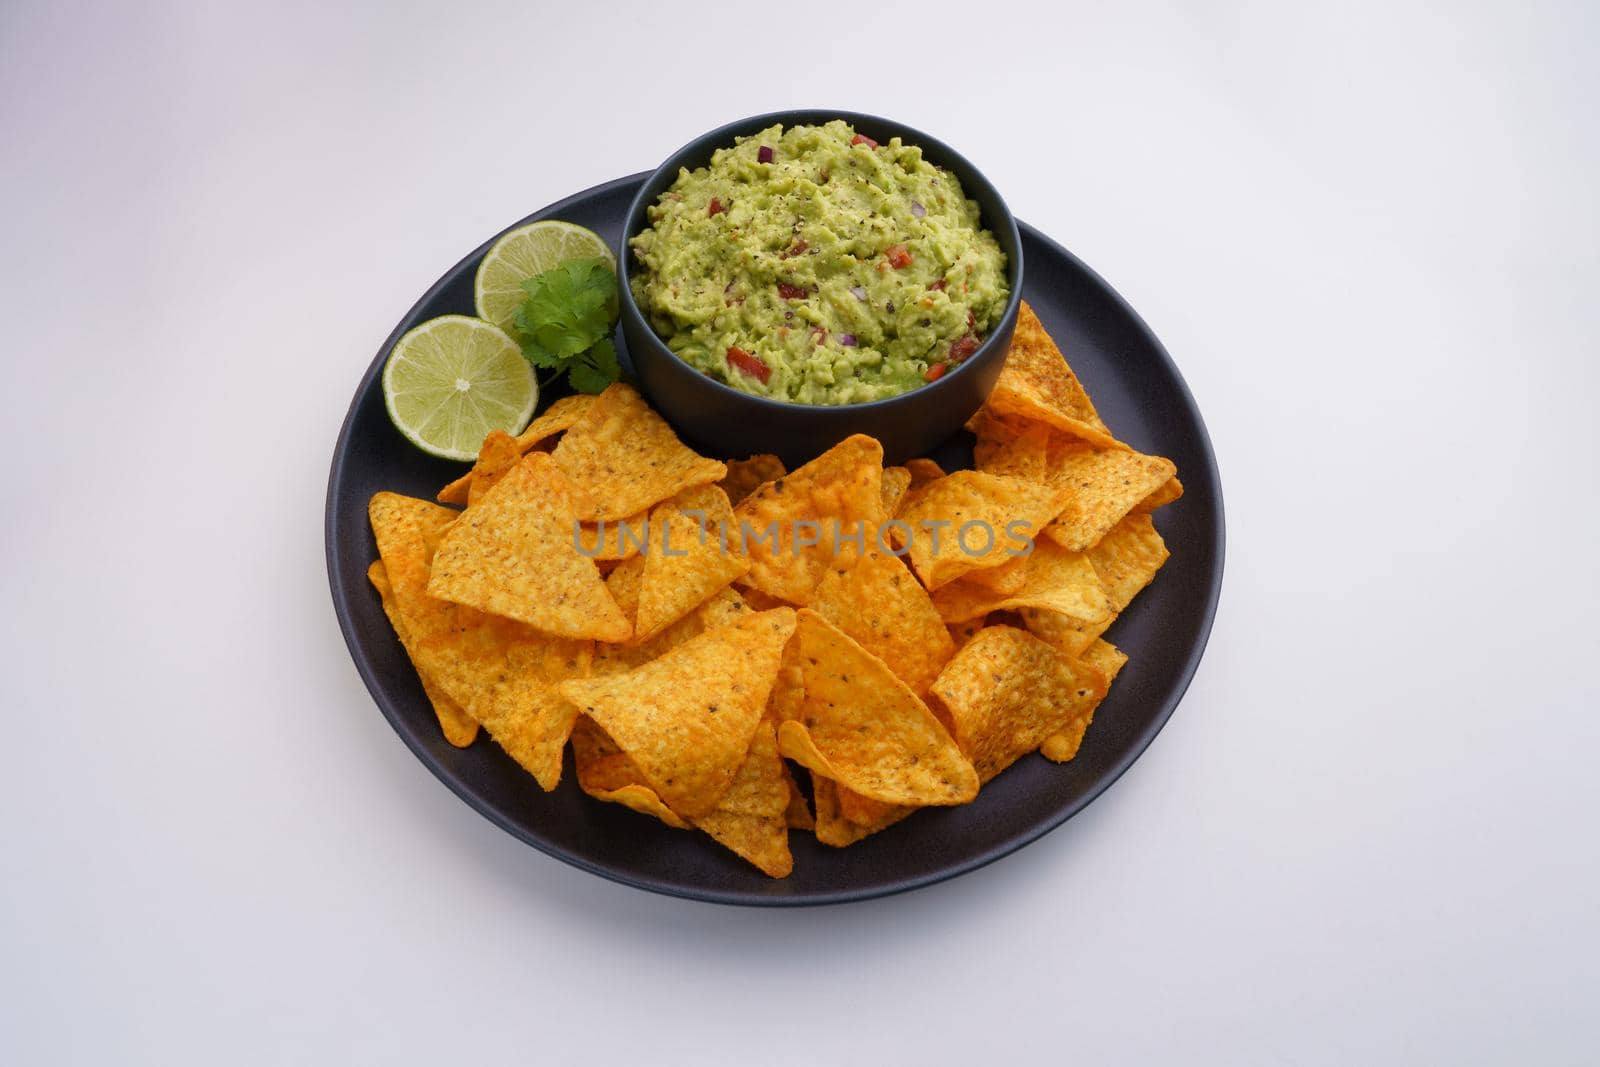 Top view of black plate of guacamole sauce or dip and tortilla chips or nachos isolated on a white background. High quality photo